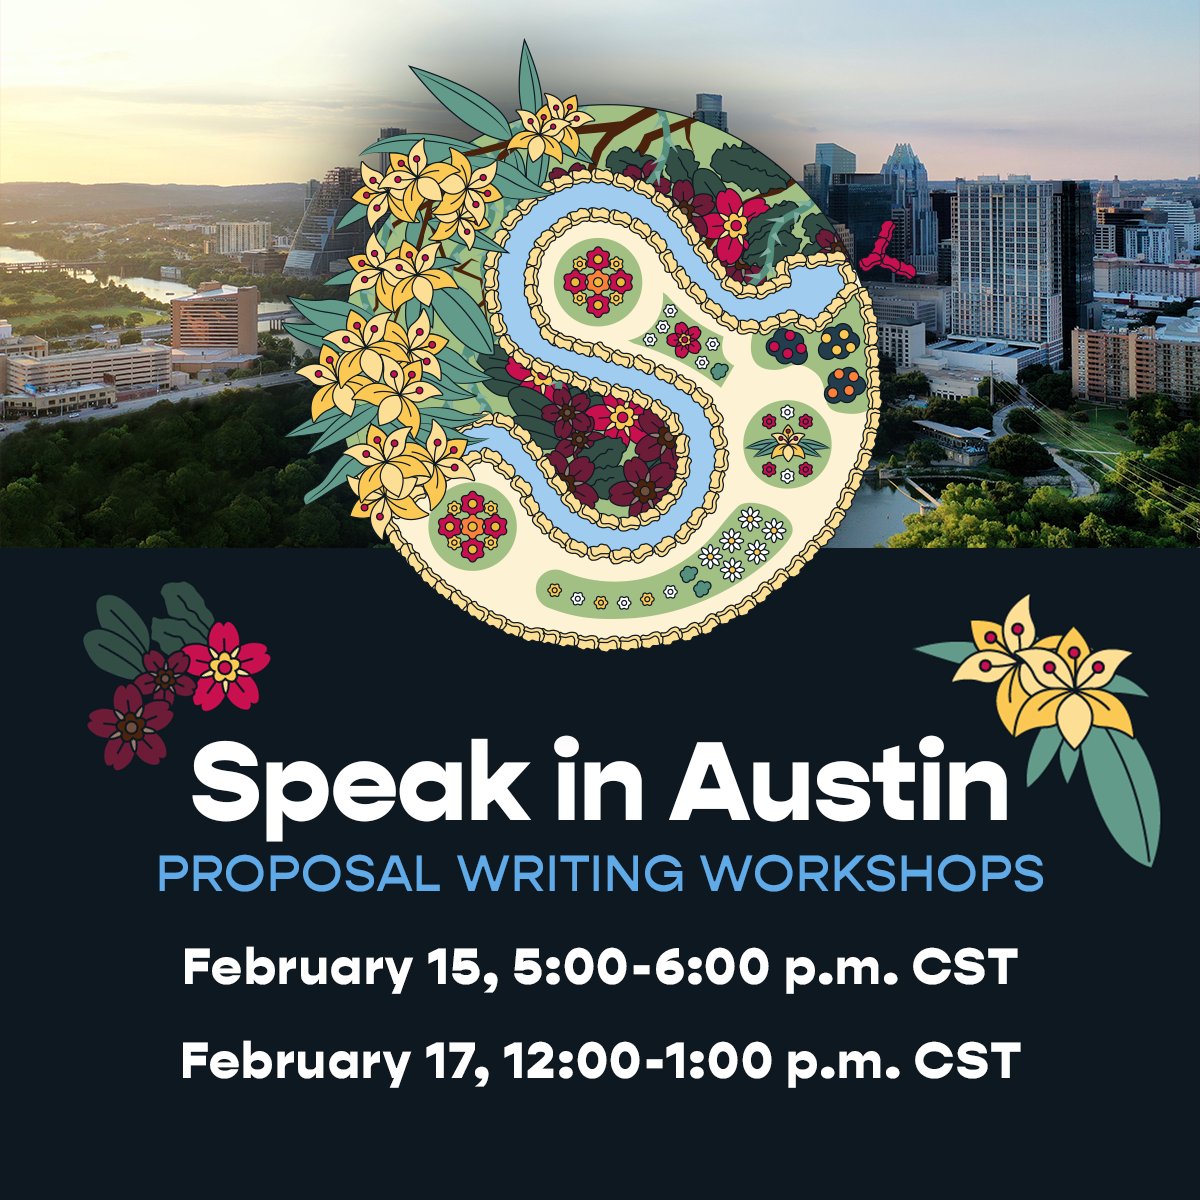 📣Are you interested in submitting a proposal to speak at #SciPy2023 but think you need help? Join the committee for 2 workshops on 🗓️February 15, 5:00-6:00 p.m. CST and February 17, 12:00-1:00 p.m. CST 🗓️ First-time speakers are encouraged! Sign up: ow.ly/uJ0450MOBUA